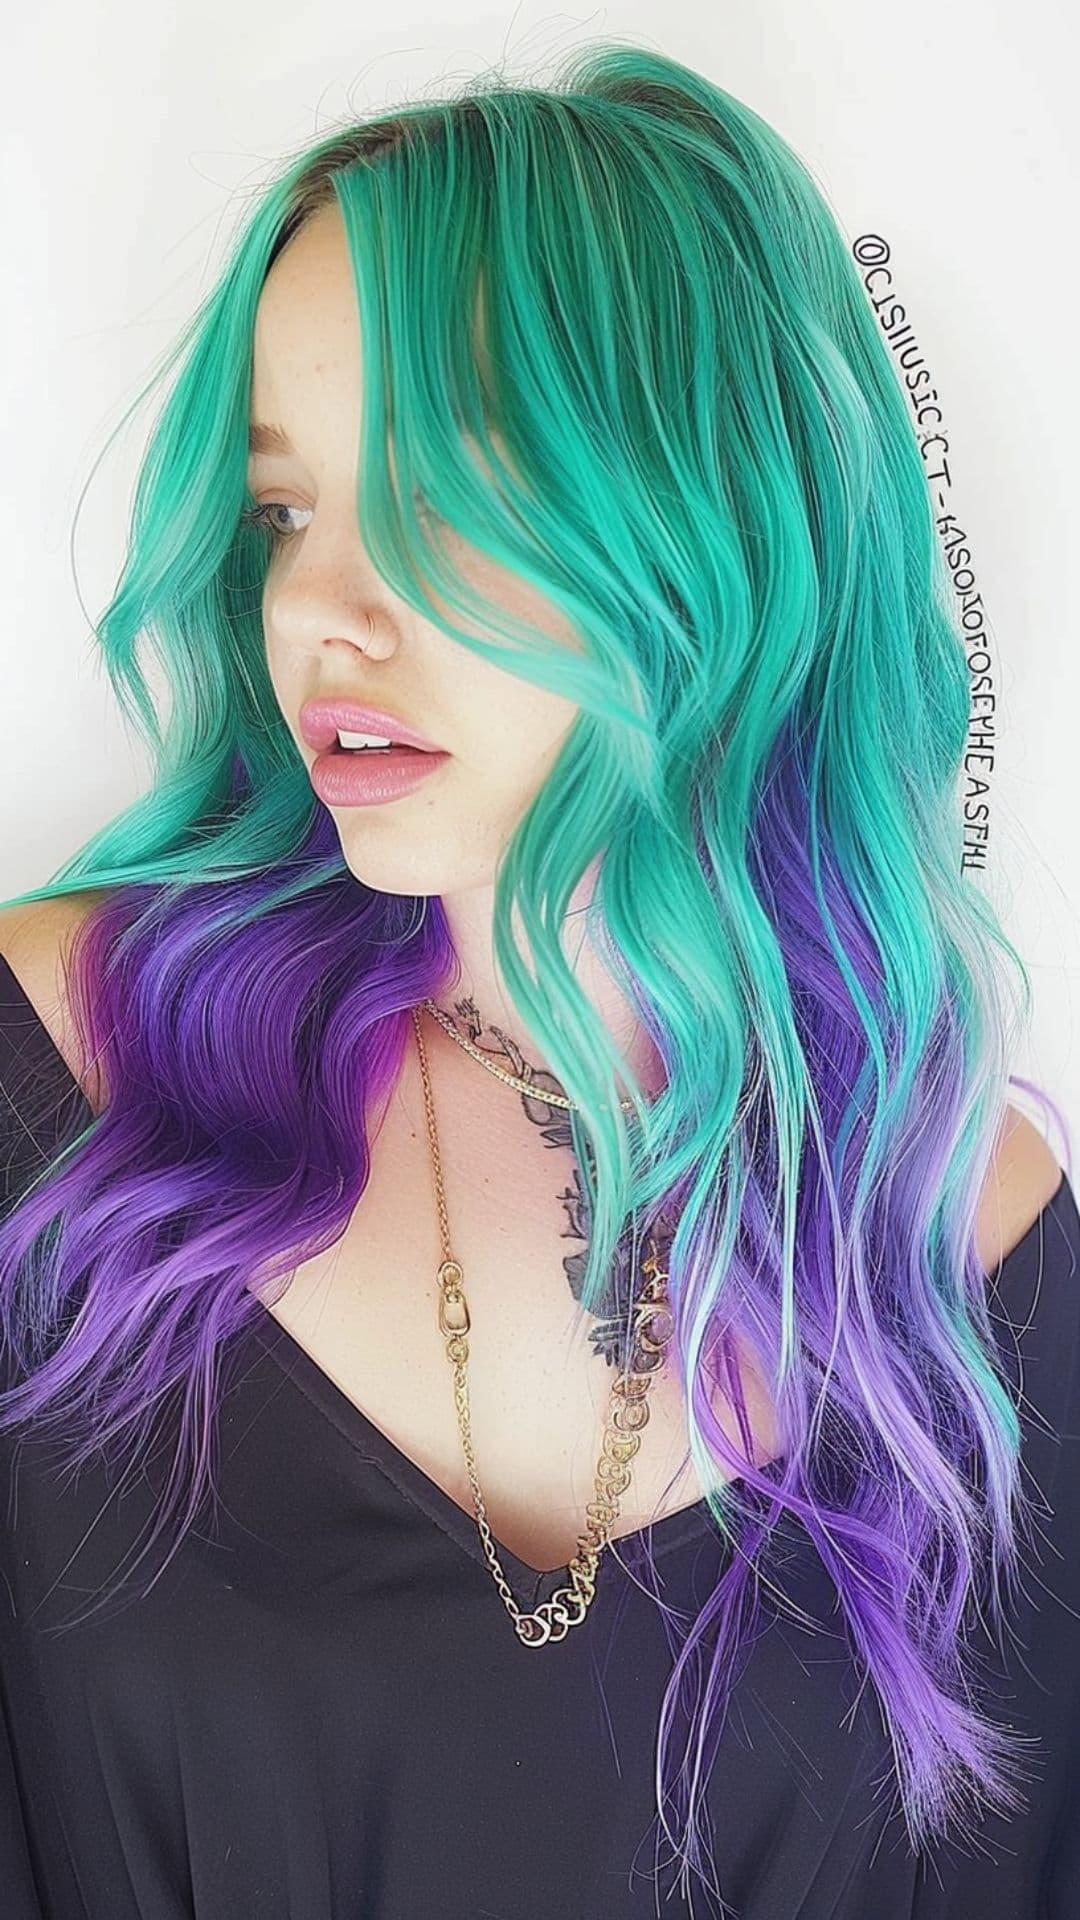 A woman modelling a teal and purple hair.